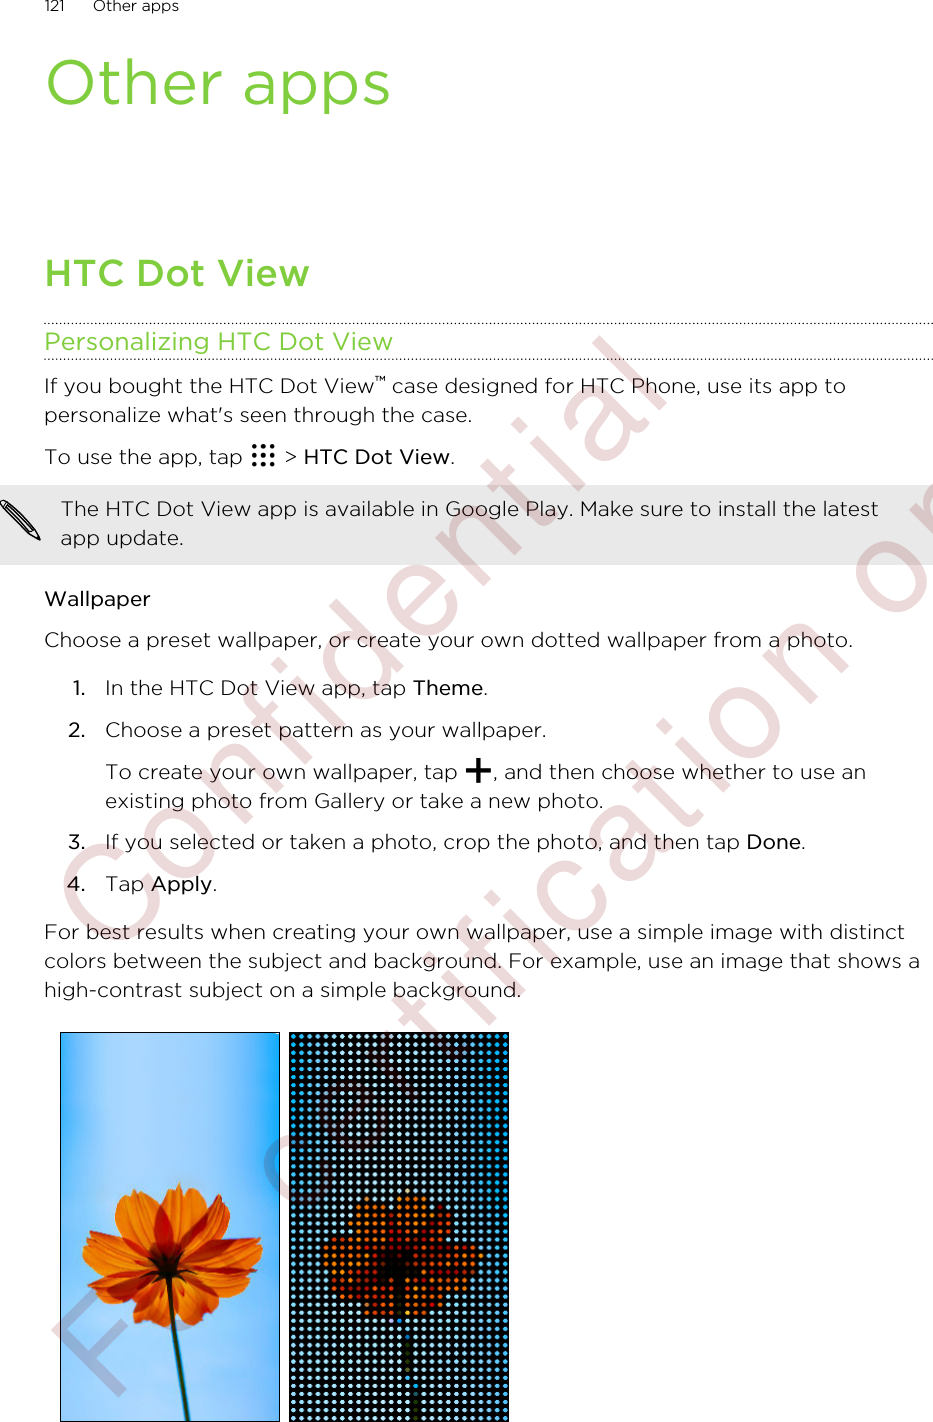 Other appsHTC Dot ViewPersonalizing HTC Dot ViewIf you bought the HTC Dot View™ case designed for HTC Phone, use its app topersonalize what&apos;s seen through the case.To use the app, tap   &gt; HTC Dot View.The HTC Dot View app is available in Google Play. Make sure to install the latestapp update.WallpaperChoose a preset wallpaper, or create your own dotted wallpaper from a photo.1. In the HTC Dot View app, tap Theme.2. Choose a preset pattern as your wallpaper. To create your own wallpaper, tap  , and then choose whether to use anexisting photo from Gallery or take a new photo.3. If you selected or taken a photo, crop the photo, and then tap Done.4. Tap Apply.For best results when creating your own wallpaper, use a simple image with distinctcolors between the subject and background. For example, use an image that shows ahigh-contrast subject on a simple background.121 Other apps        Confident ial  For cert ificat ion only